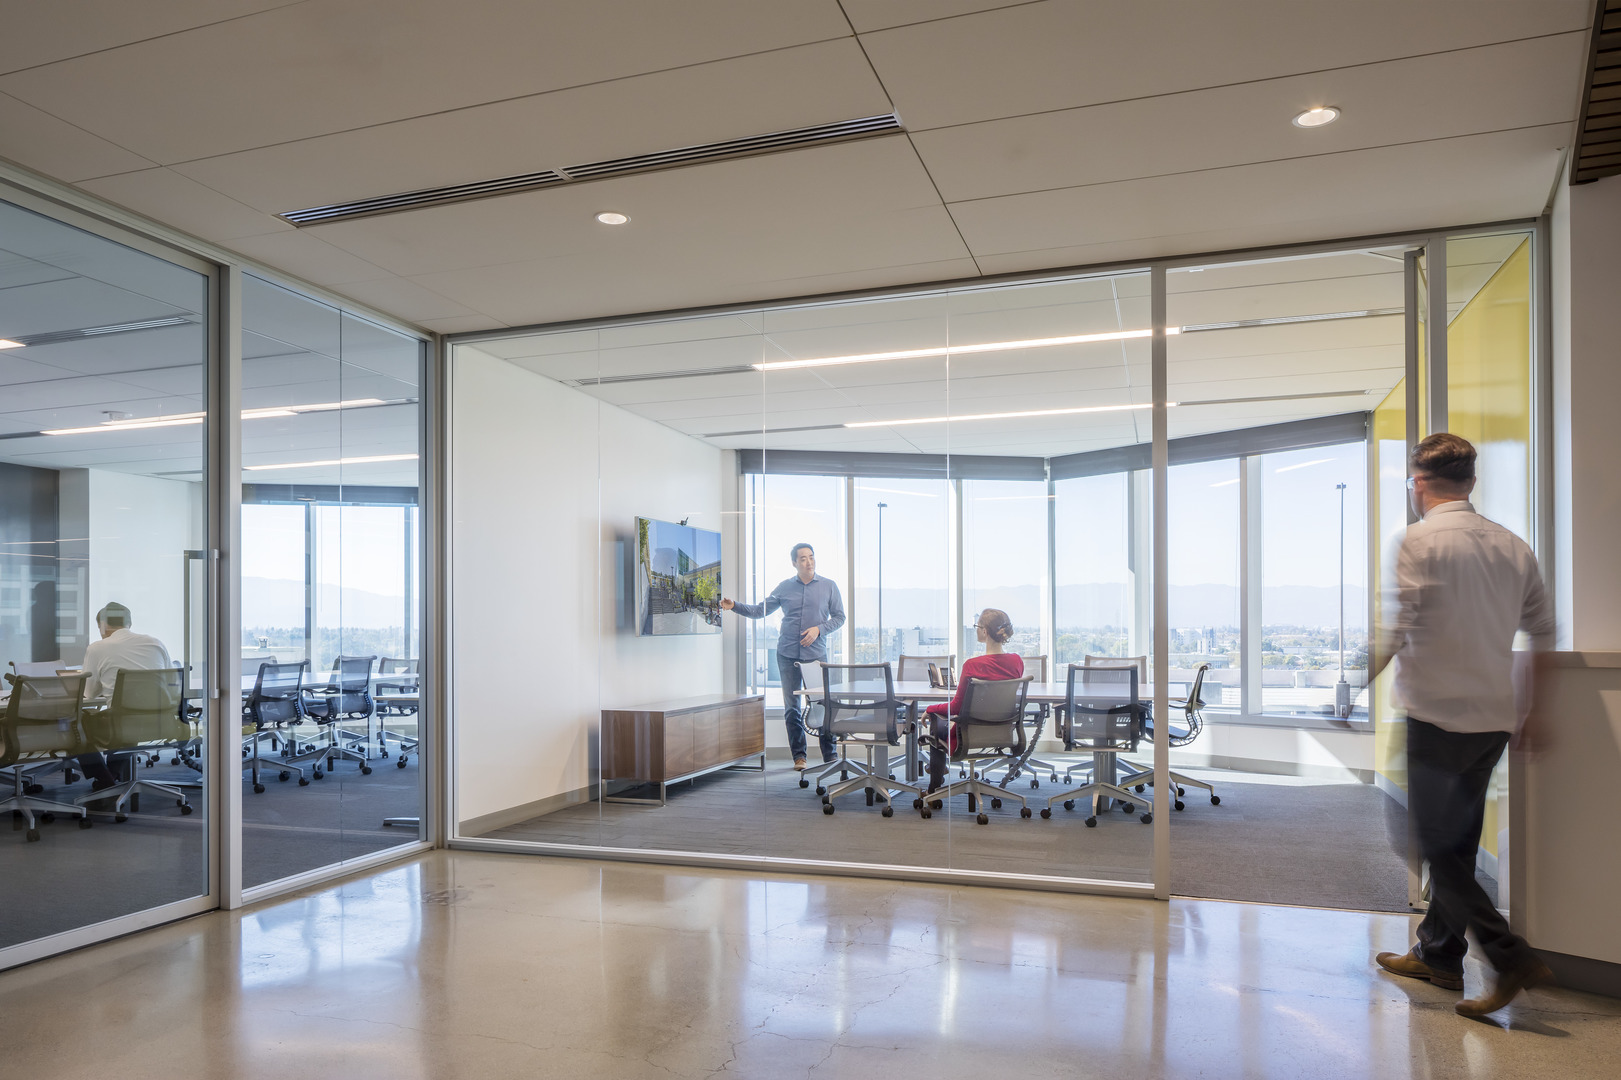 Office Architecture Concepts: How Workplace Design Affects Human Behavior |  Ideas | HMC Architects